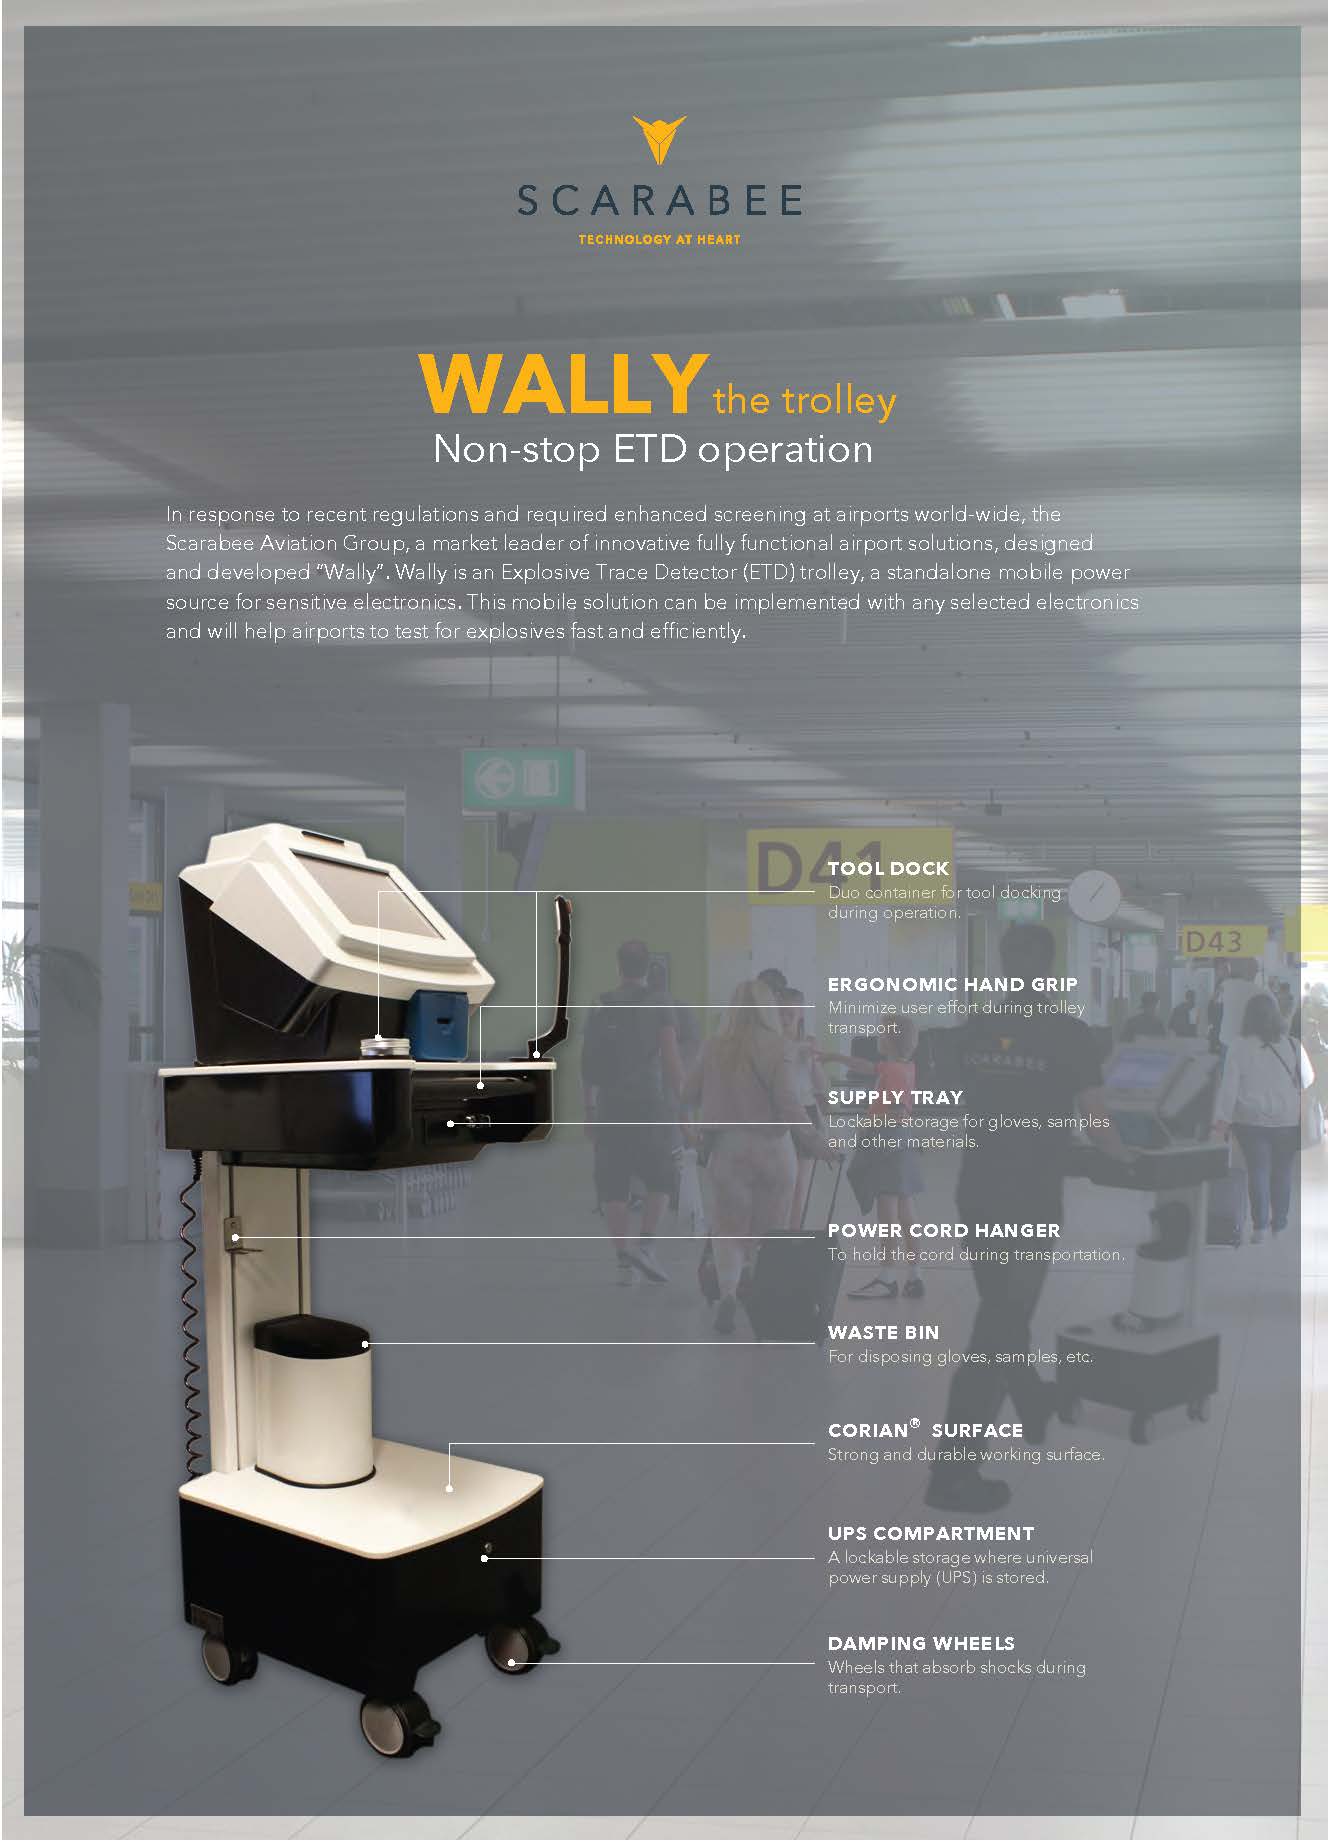 Wally the trolley is an Explosive Trace Detector